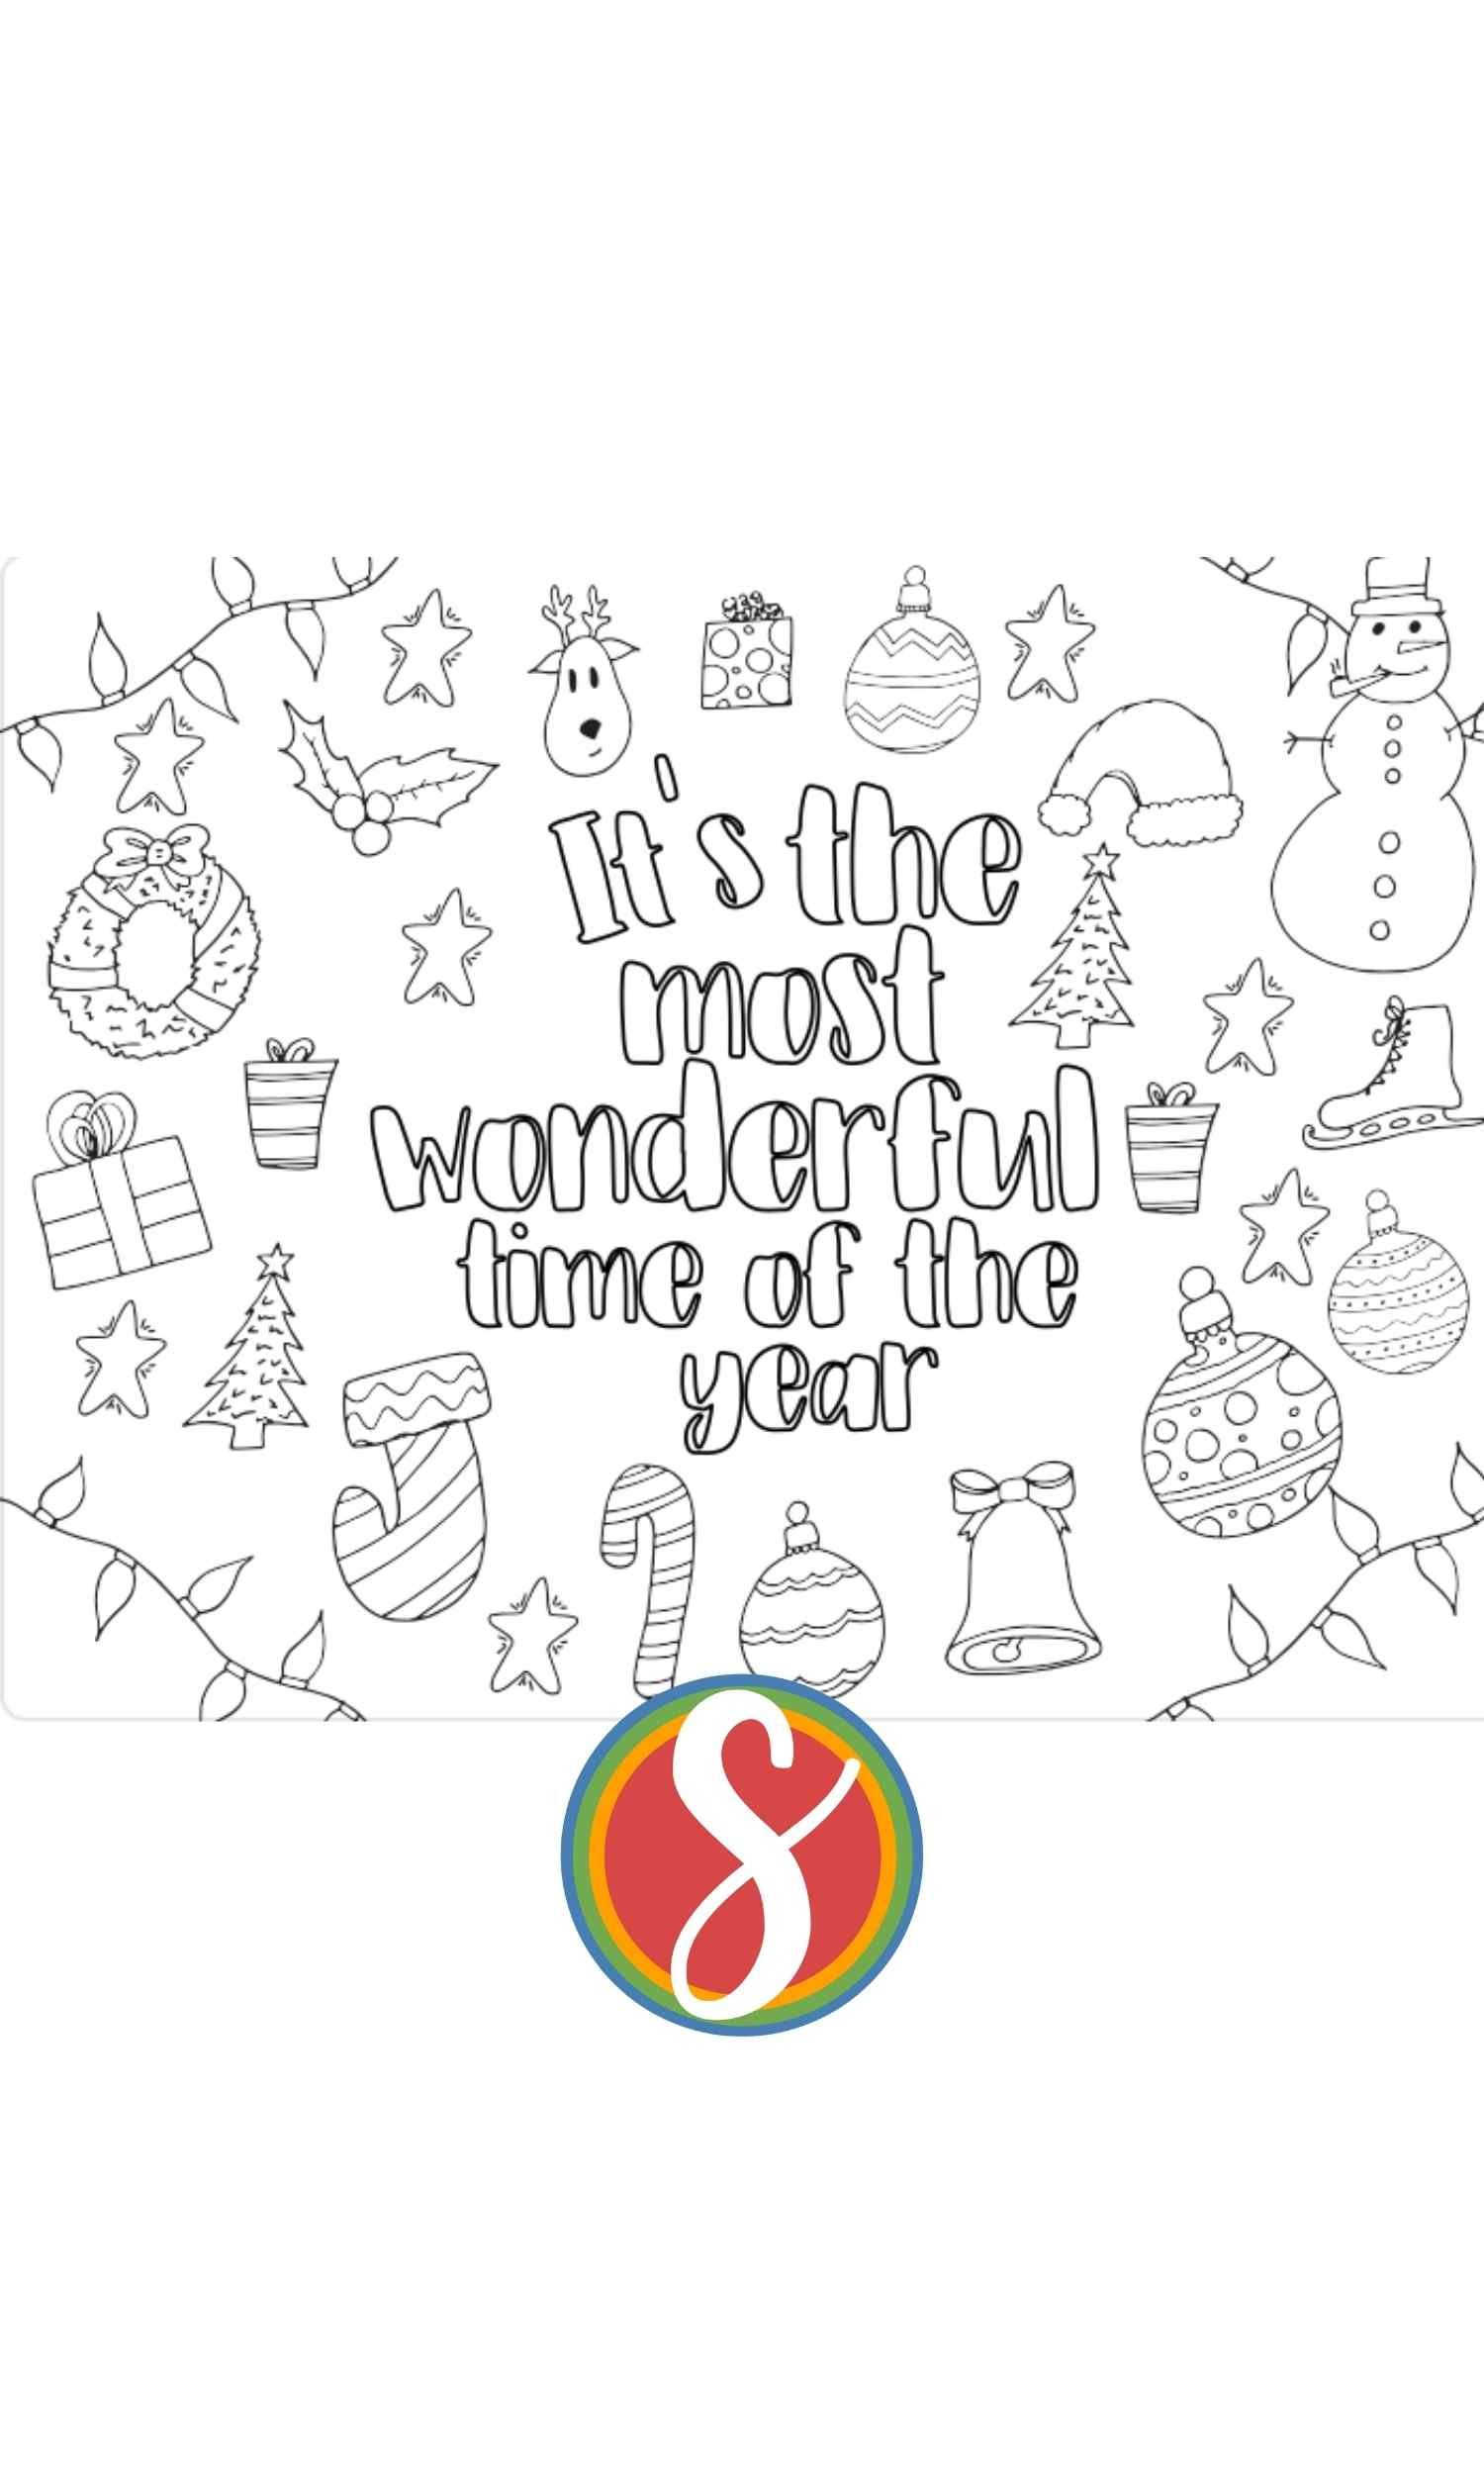 colorable text reads "It's the most wonderful time of the year" and the text is surrounded by colorable Christmas images - gifts, lights, snowmen, and ornaments